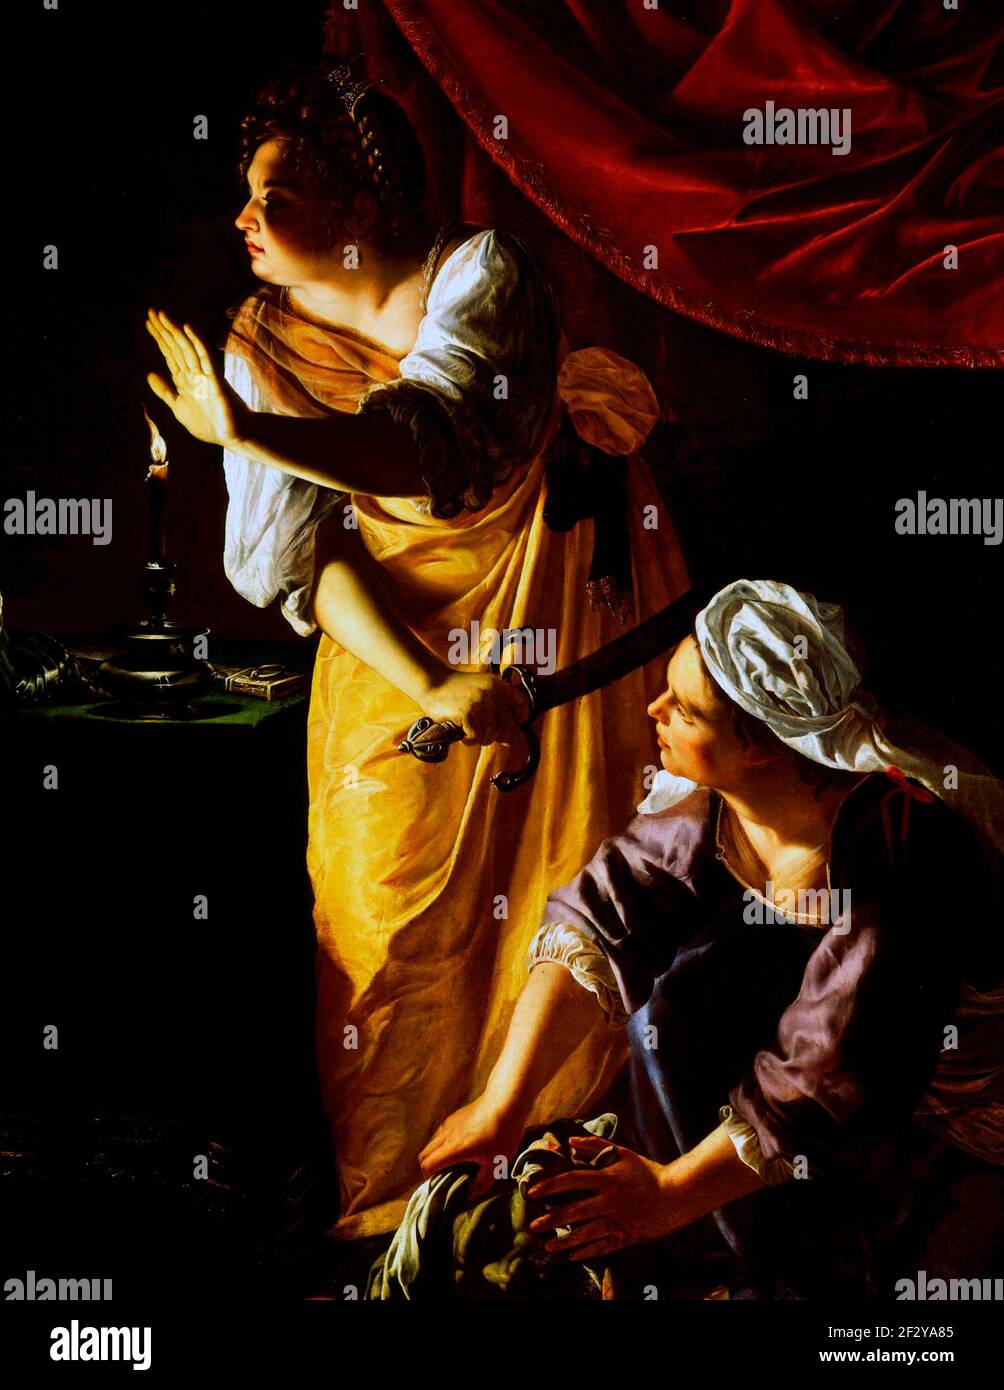 Judith and her Maidservant - Judith and her servant pause, seeming to hear a noise outside Holofernes’ tent. The shadowy interior is theatrically illuminated by a single candle. Judith’s hand shields her face from the glow, drawing attention to Holofernes’ discarded iron gauntlet. The viewer’s eye travels to the object in the maidservant’s hands: Holofernes’ severed head - Artemisia Gentileschi, circa 1625 Stock Photo